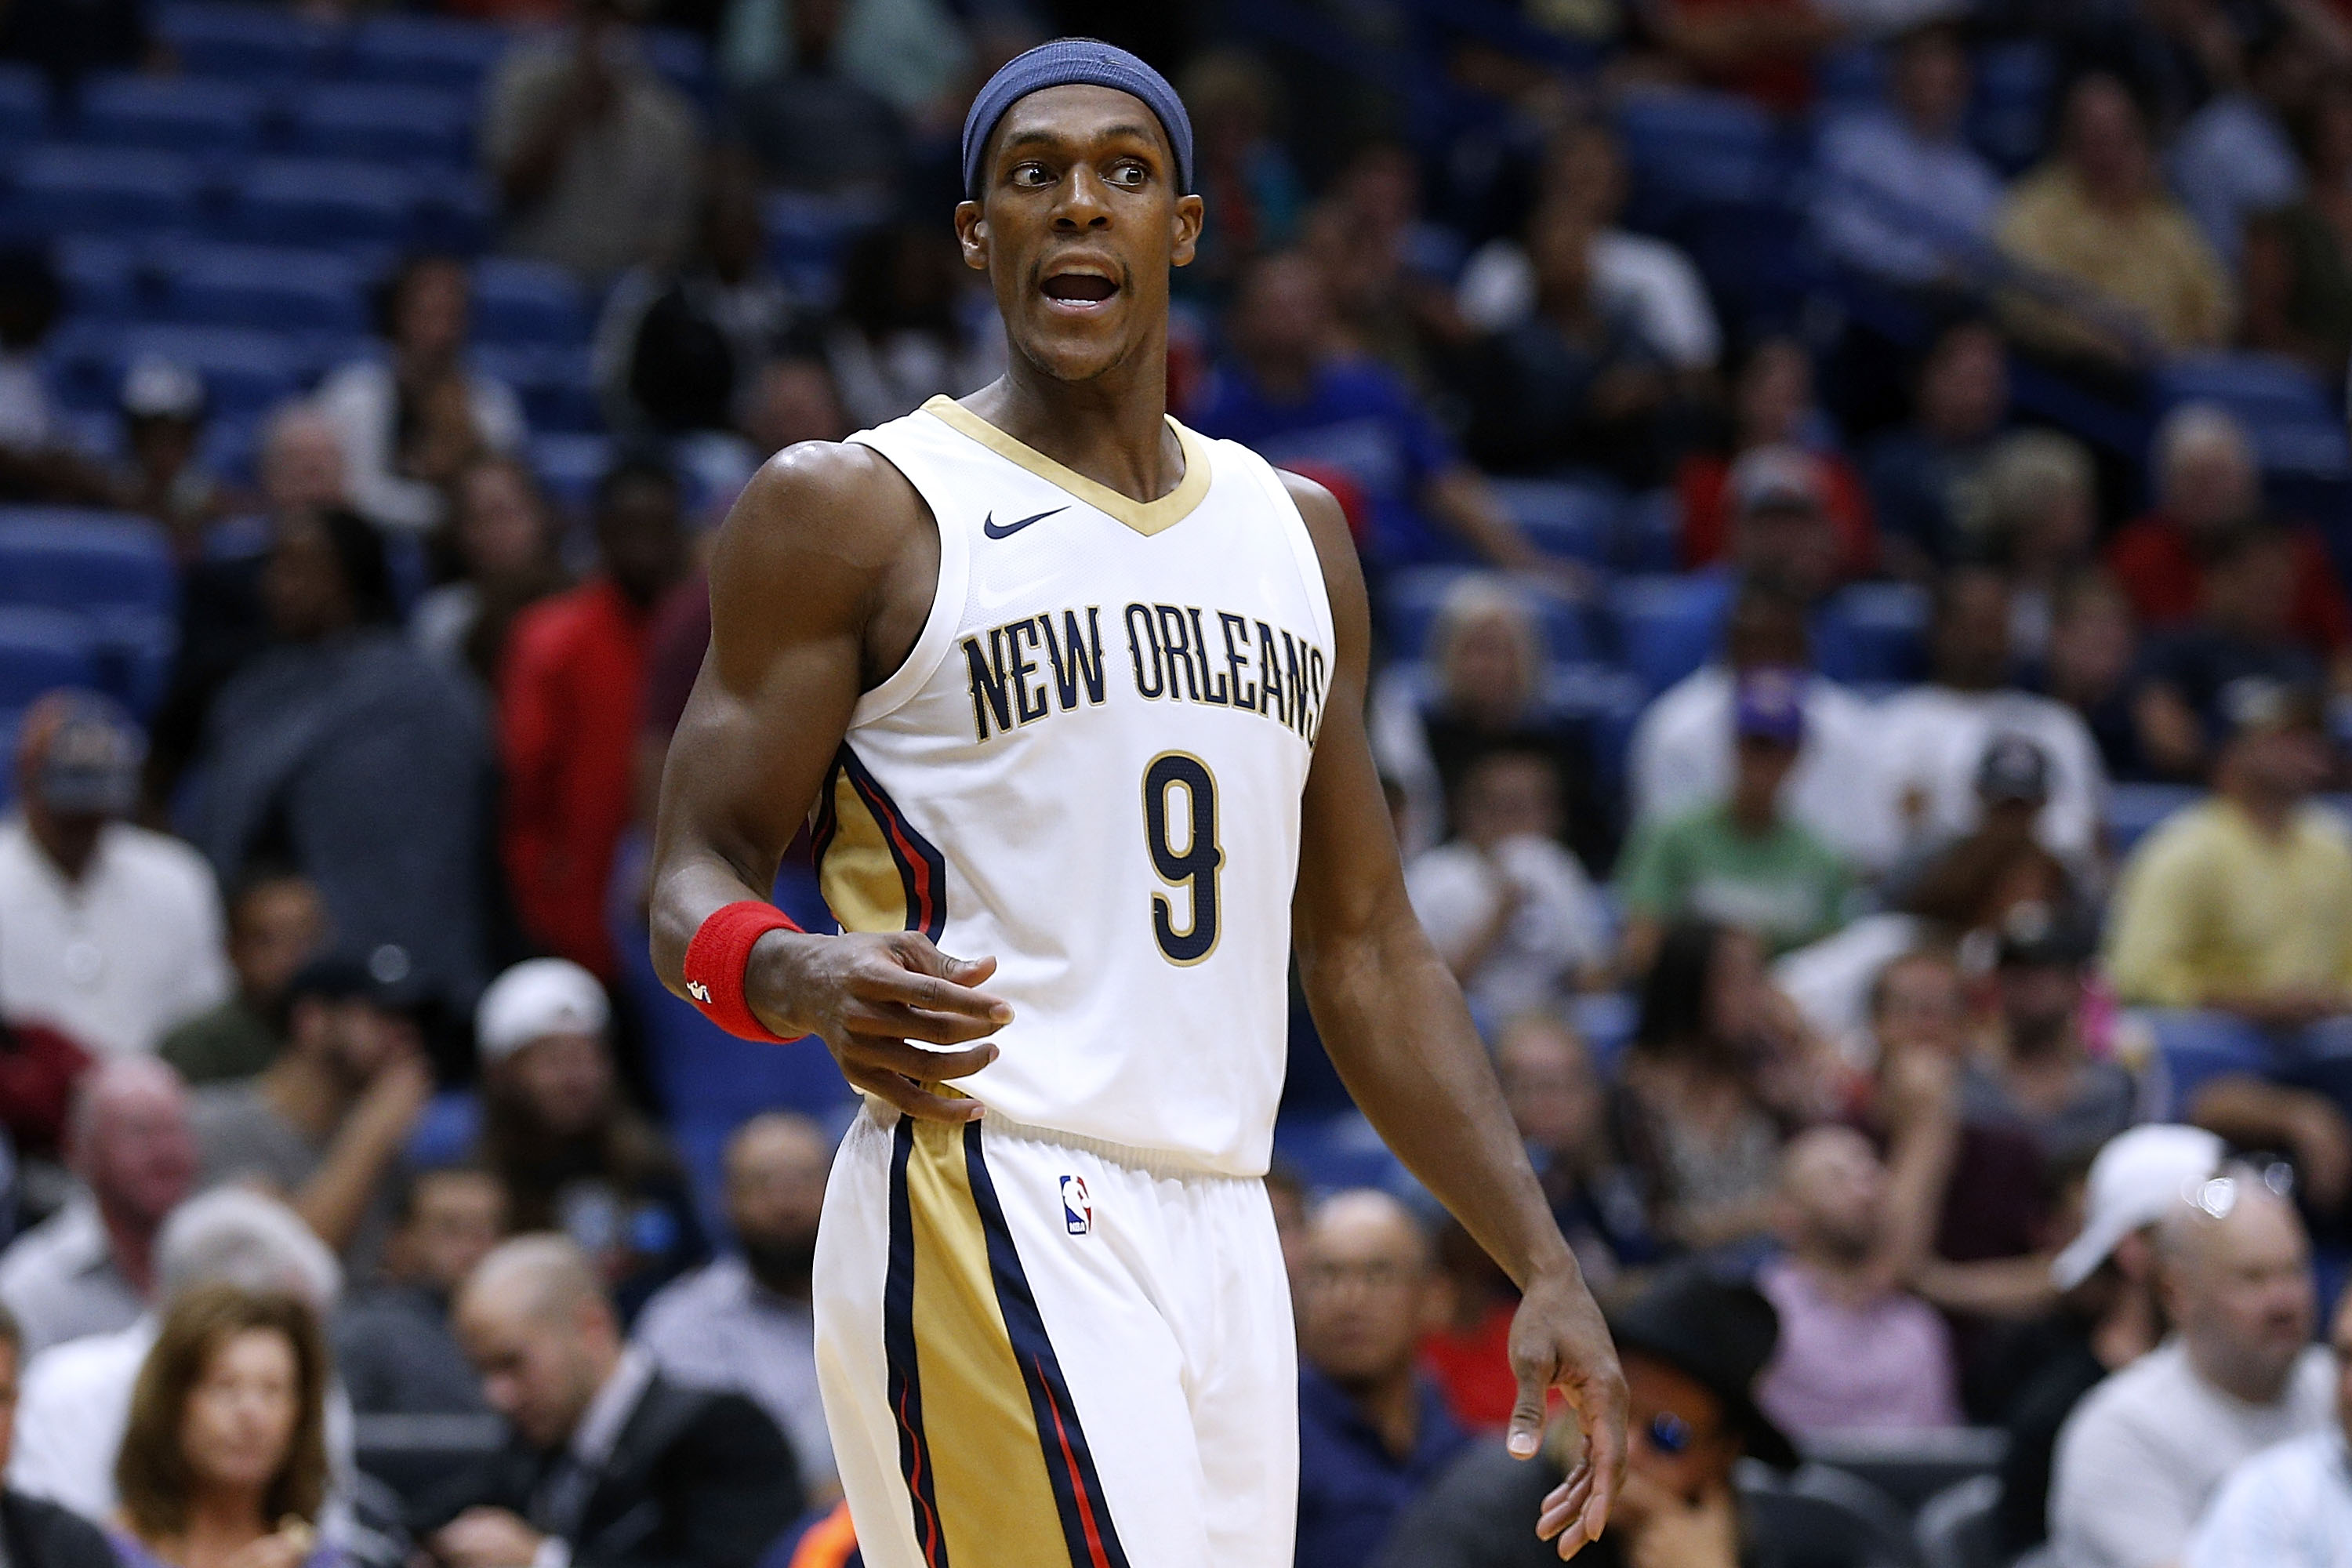 Rajon Rondo injury: Pelicans guard to miss 4-6 weeks after hernia